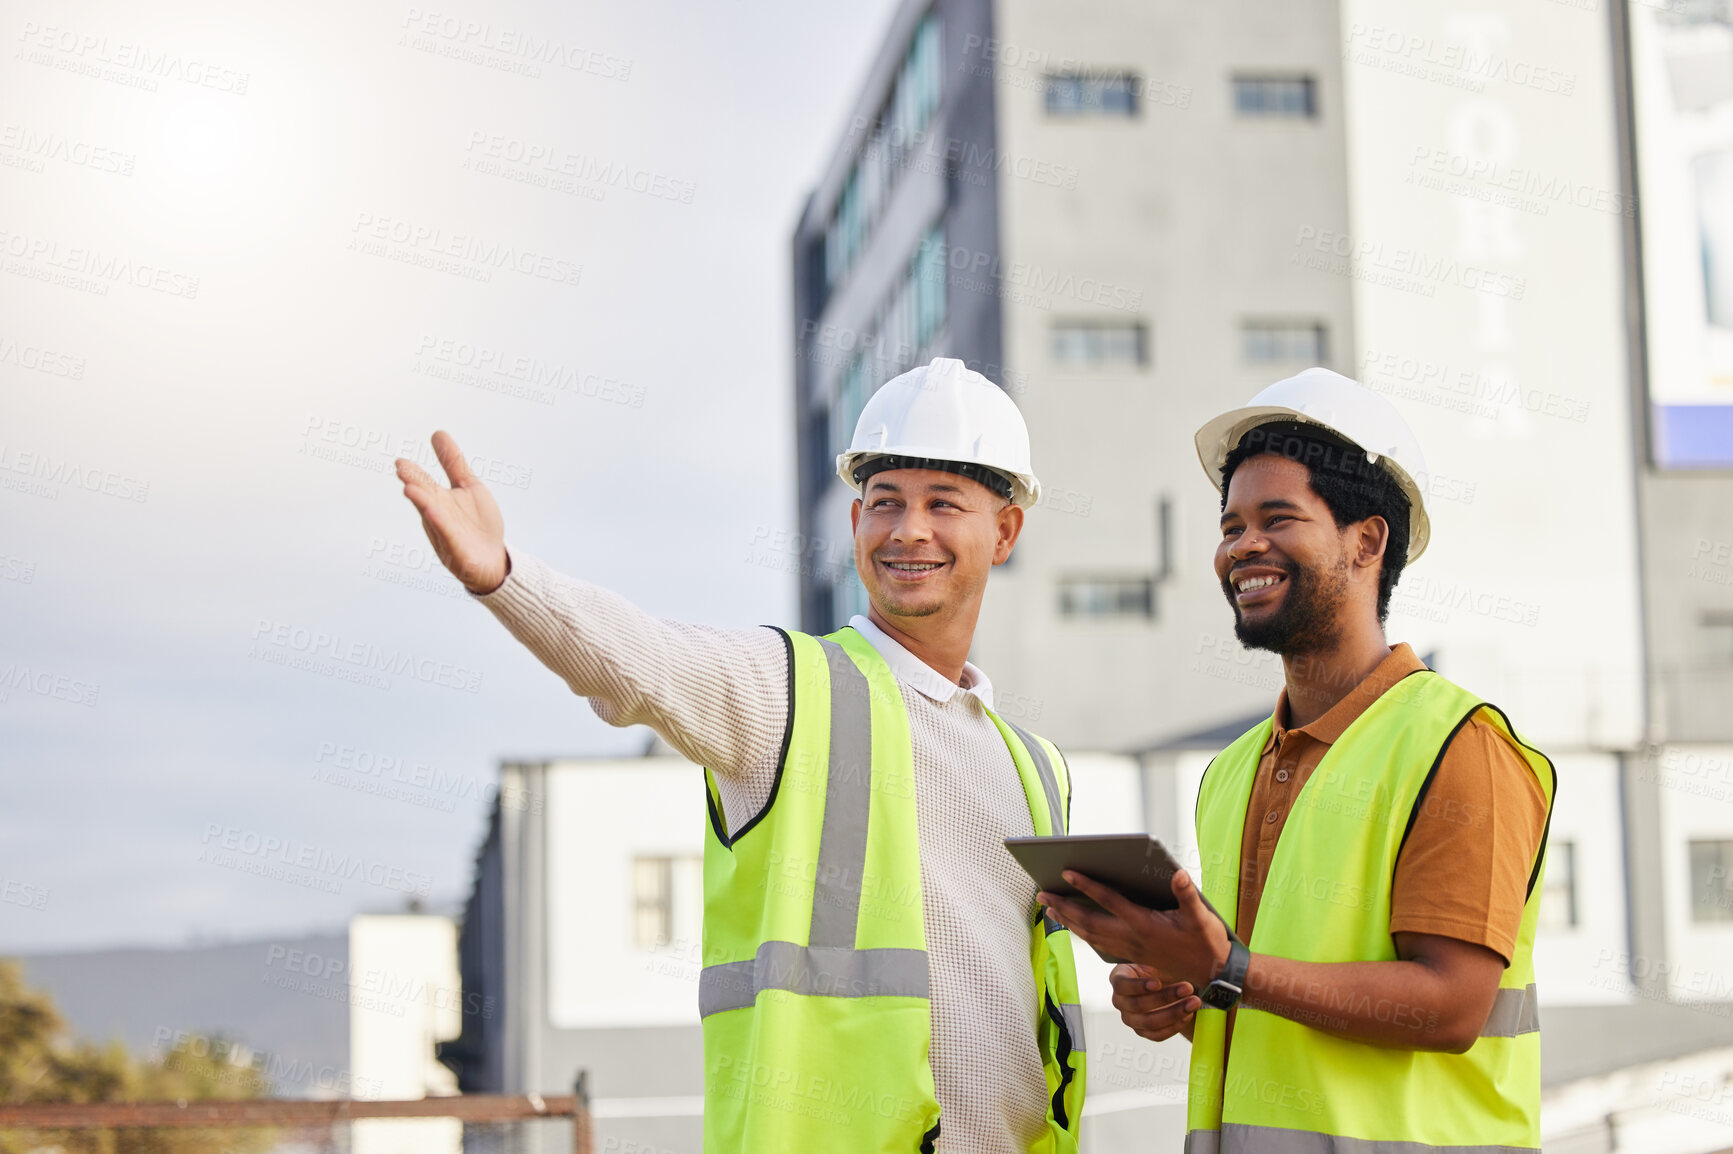 Buy stock photo Tablet, teamwork or architecture with an engineer man and designer planning on a construction site. Architect, building and collaboration with men working together to design a development project